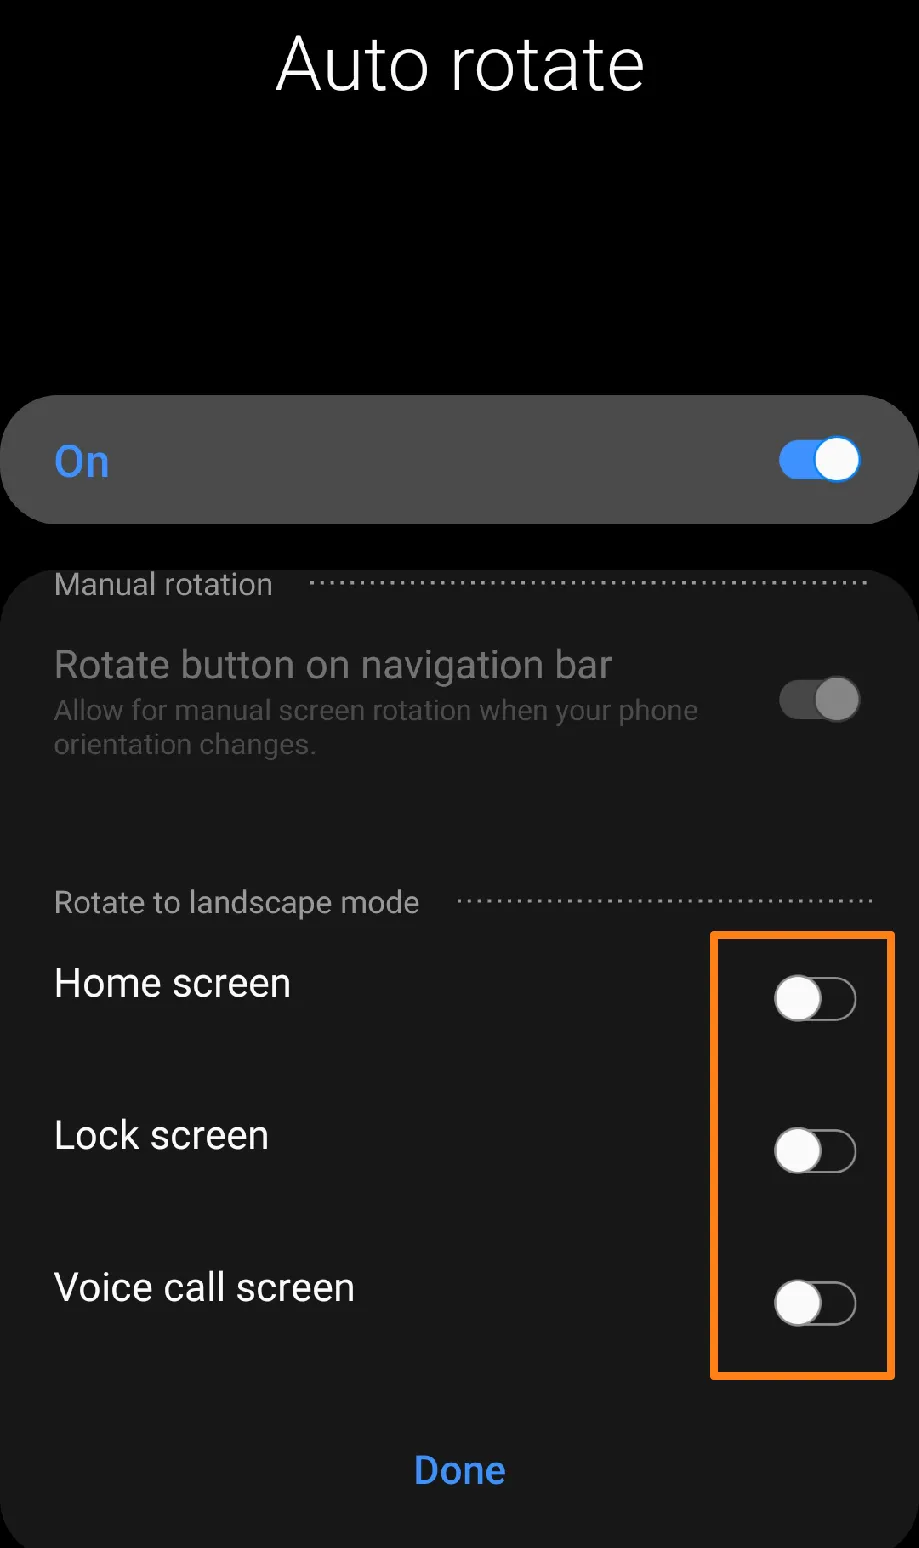 Activate the Home Screen, Lock Screen, and Voice Call Screen buttons How To Fix Android Screen Not Rotating